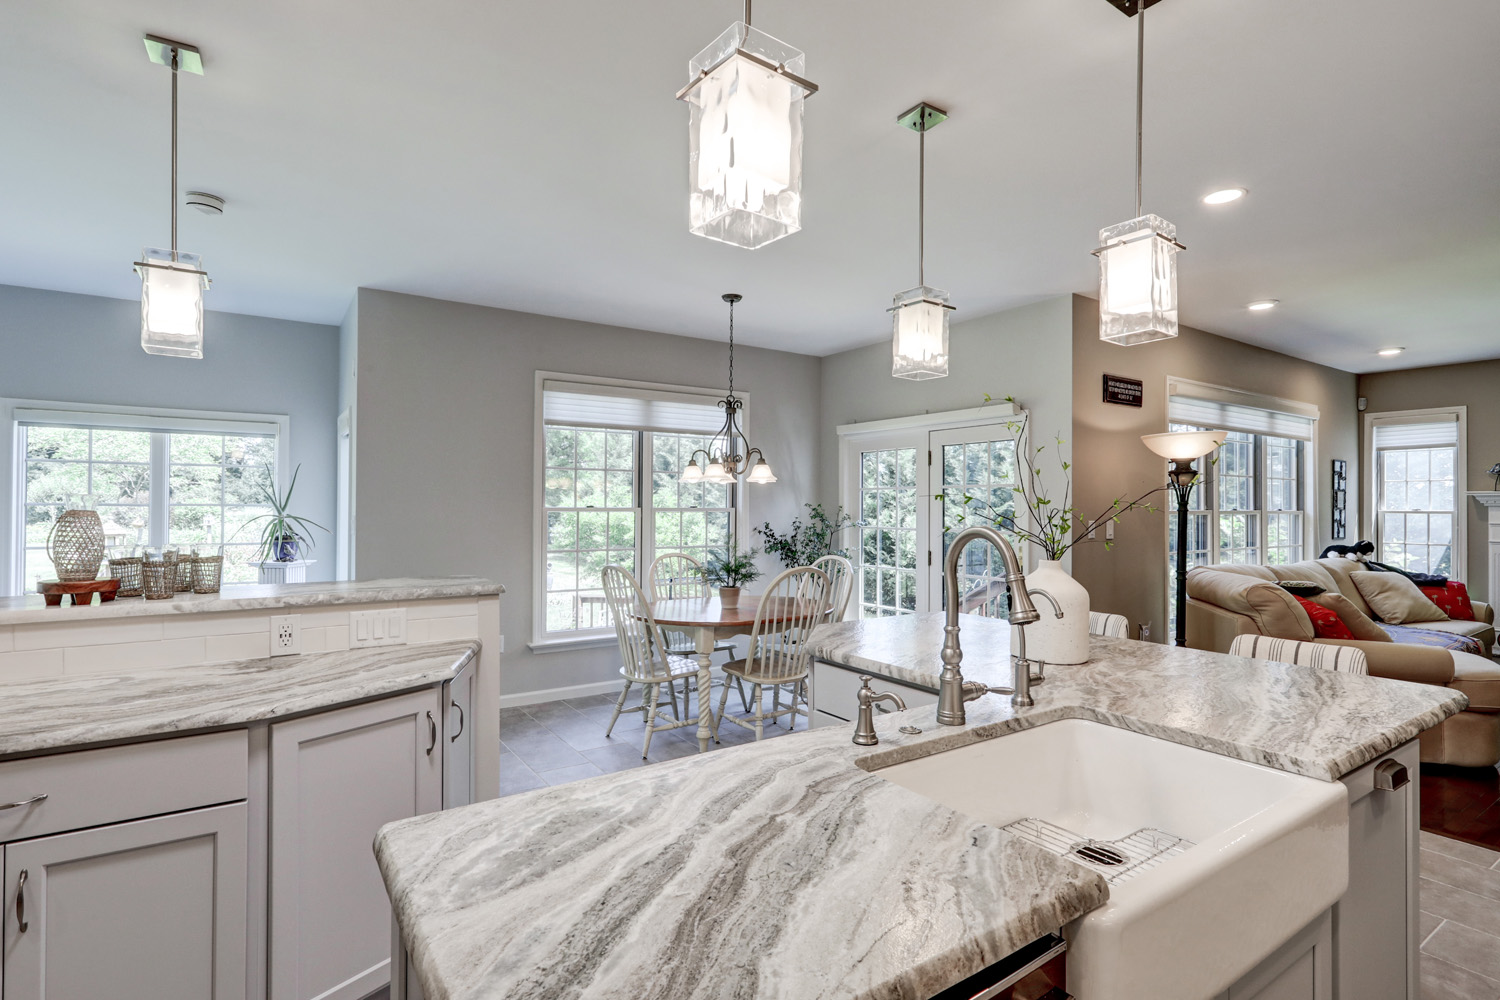 Conestoga Valley Kitchen Remodel with pendant lighting